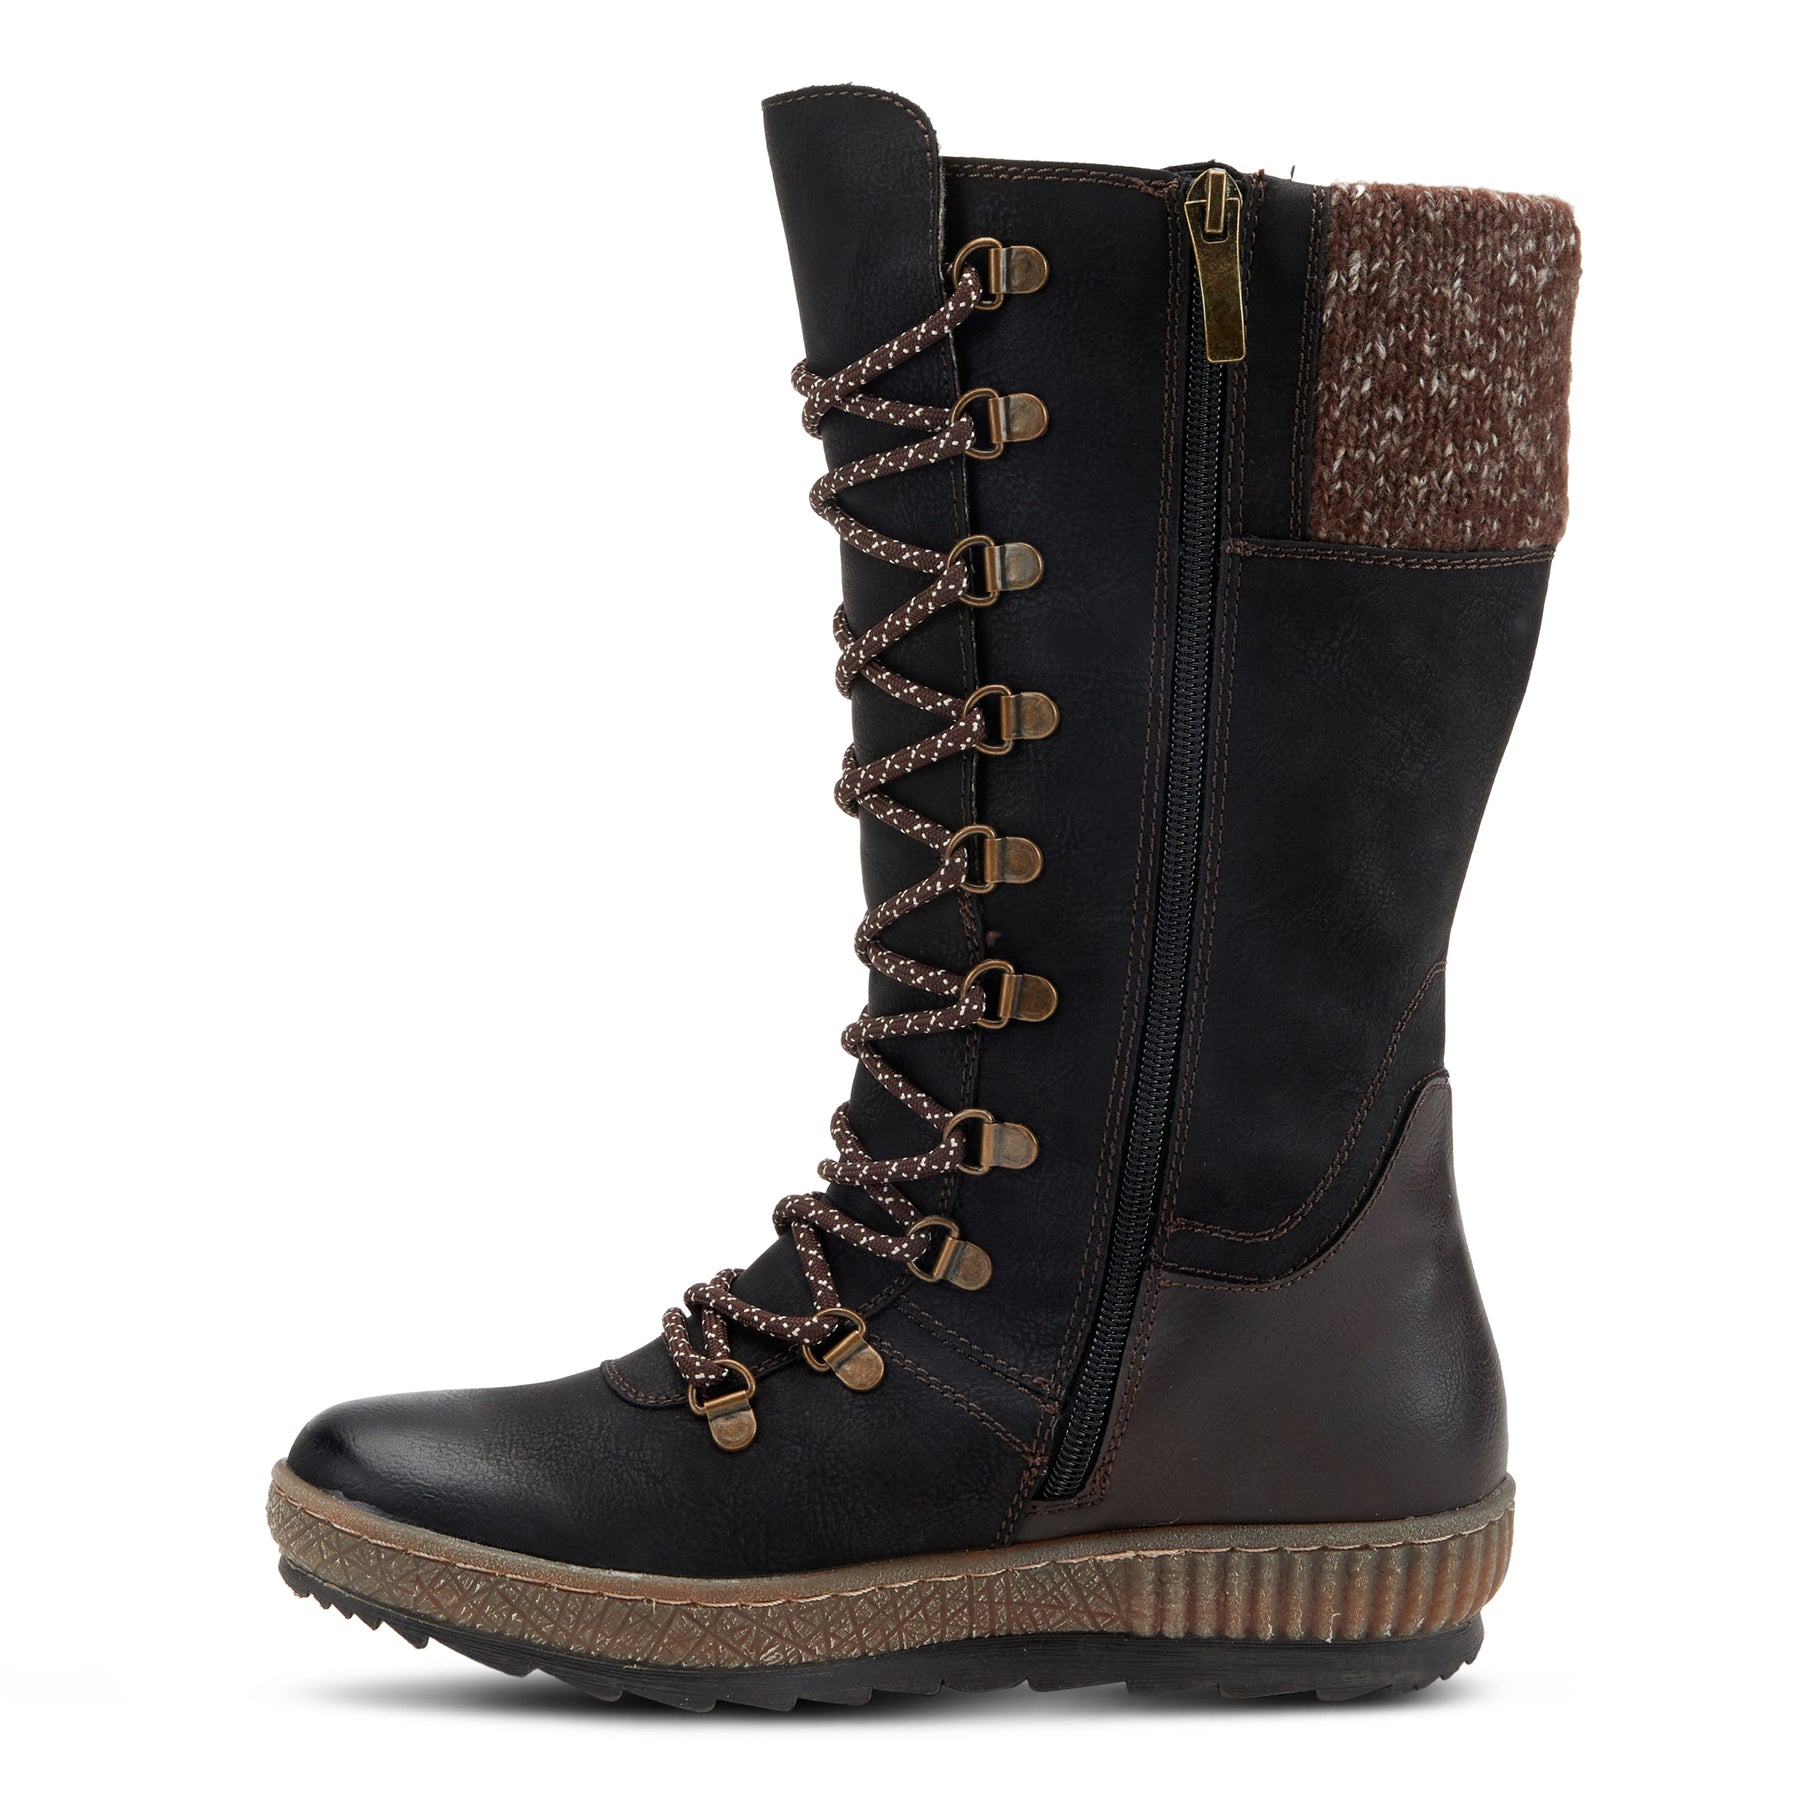 CHIBERO BOOT by SPRING STEP – Spring Step Shoes